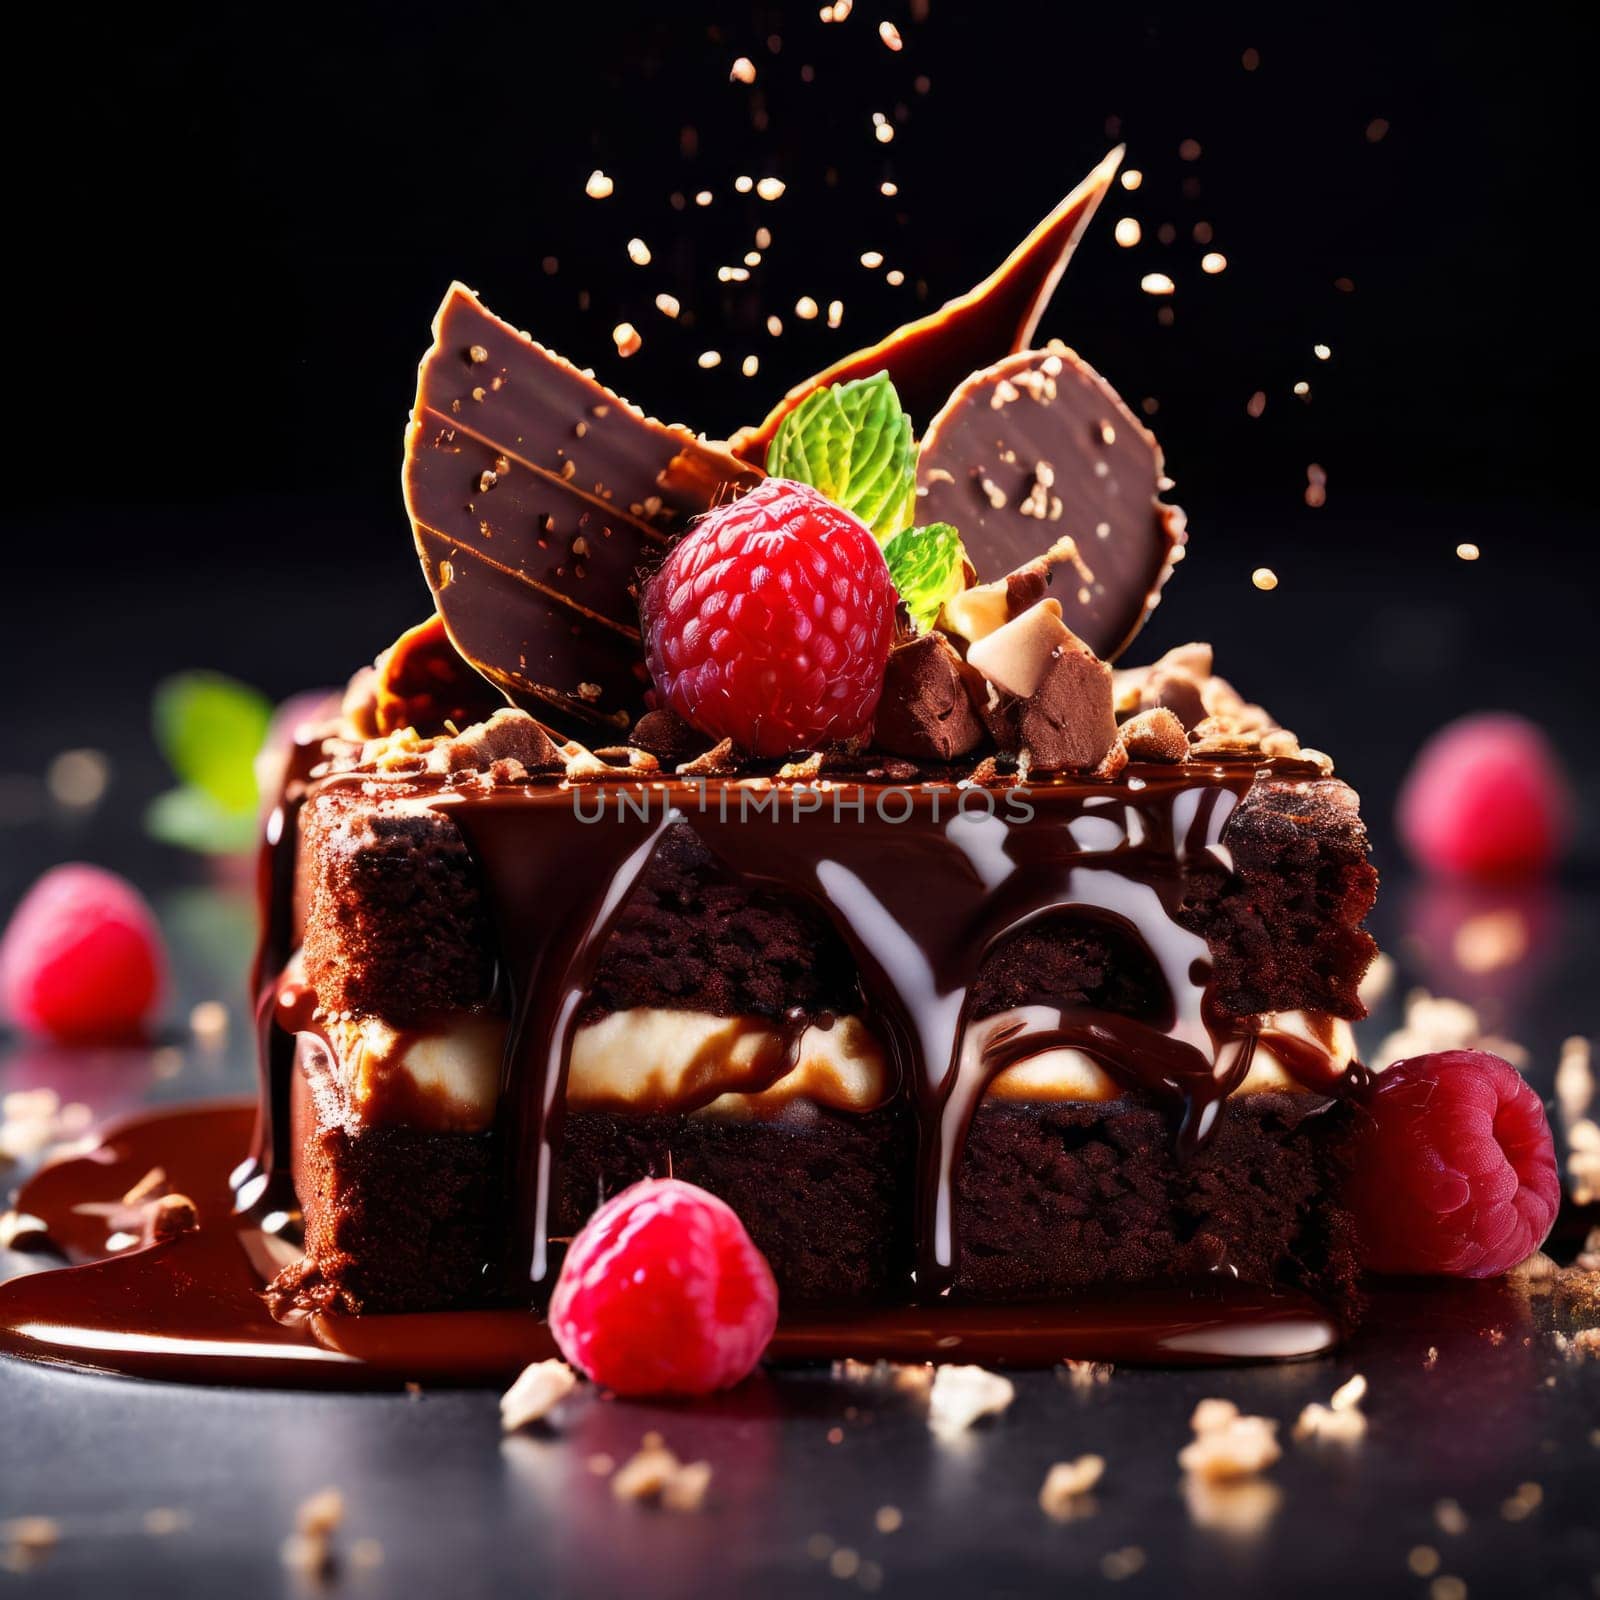 Chocolate cake with raspberries, chocolate sauce. Cake is adorned with fresh raspberries, exquisite chocolate sauce, creating delectable, luxurious dessert. For advertise cafe, patisserie, restaurant